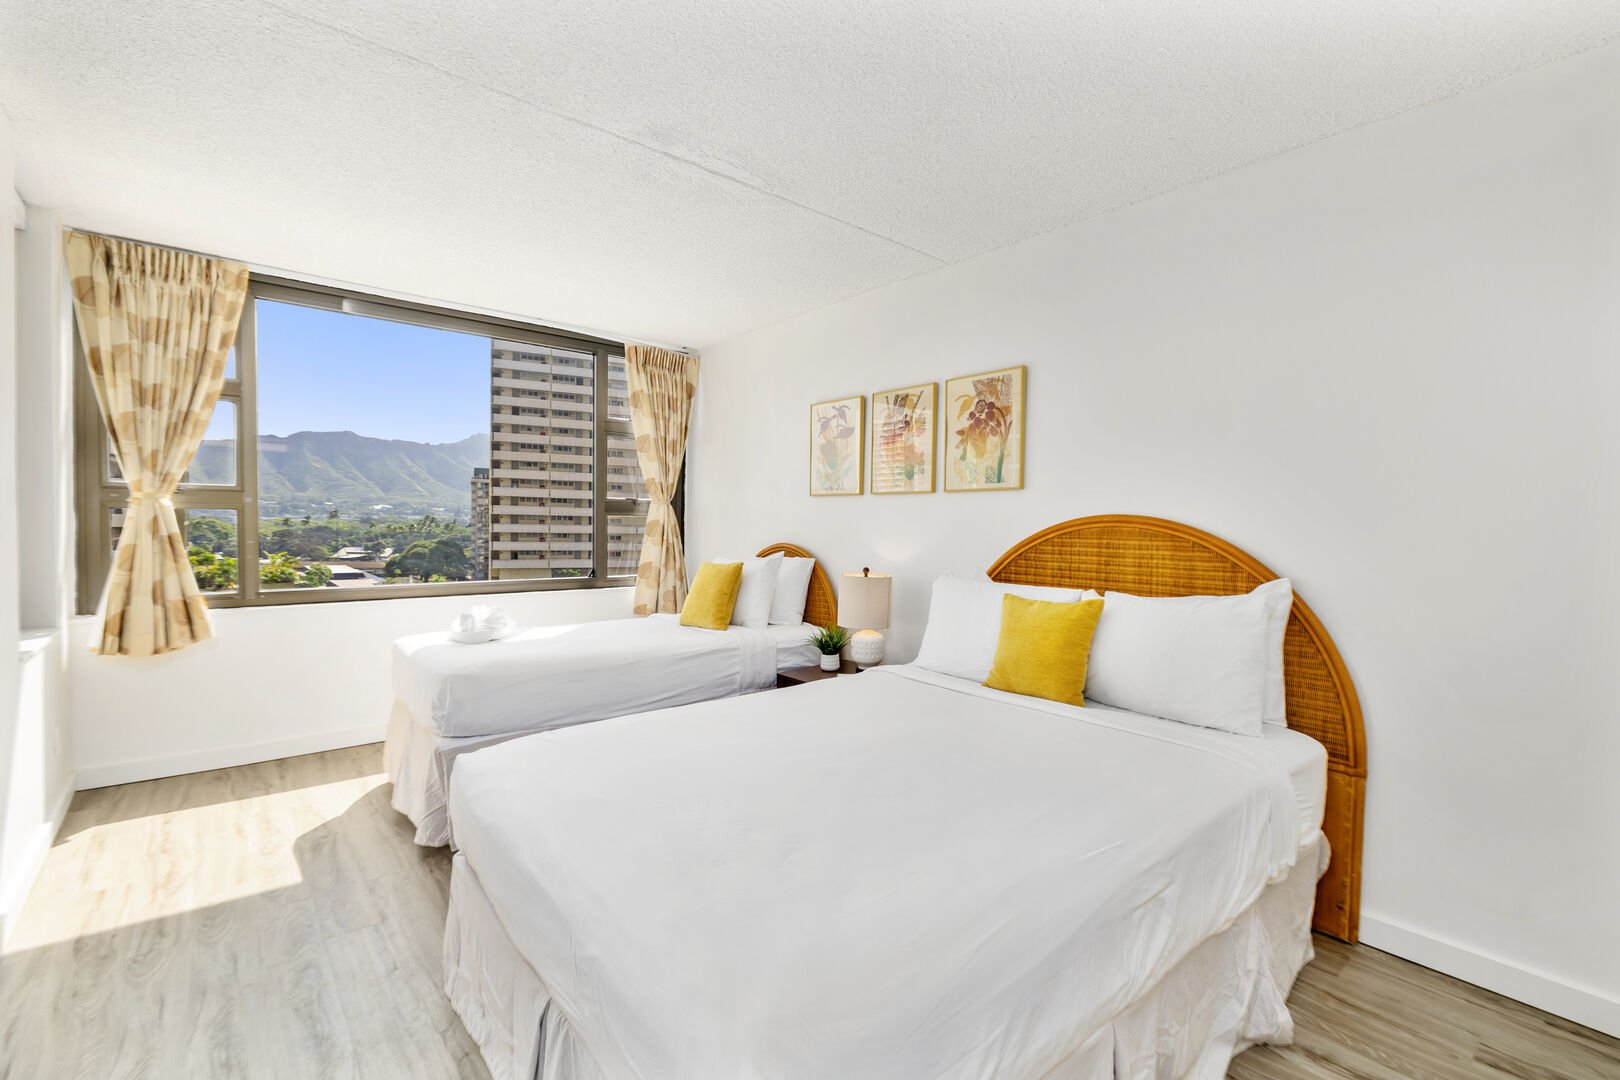 Relax in your bedroom with 1 queen-size and 1 twin-size bed, and a beautiful mountain view.